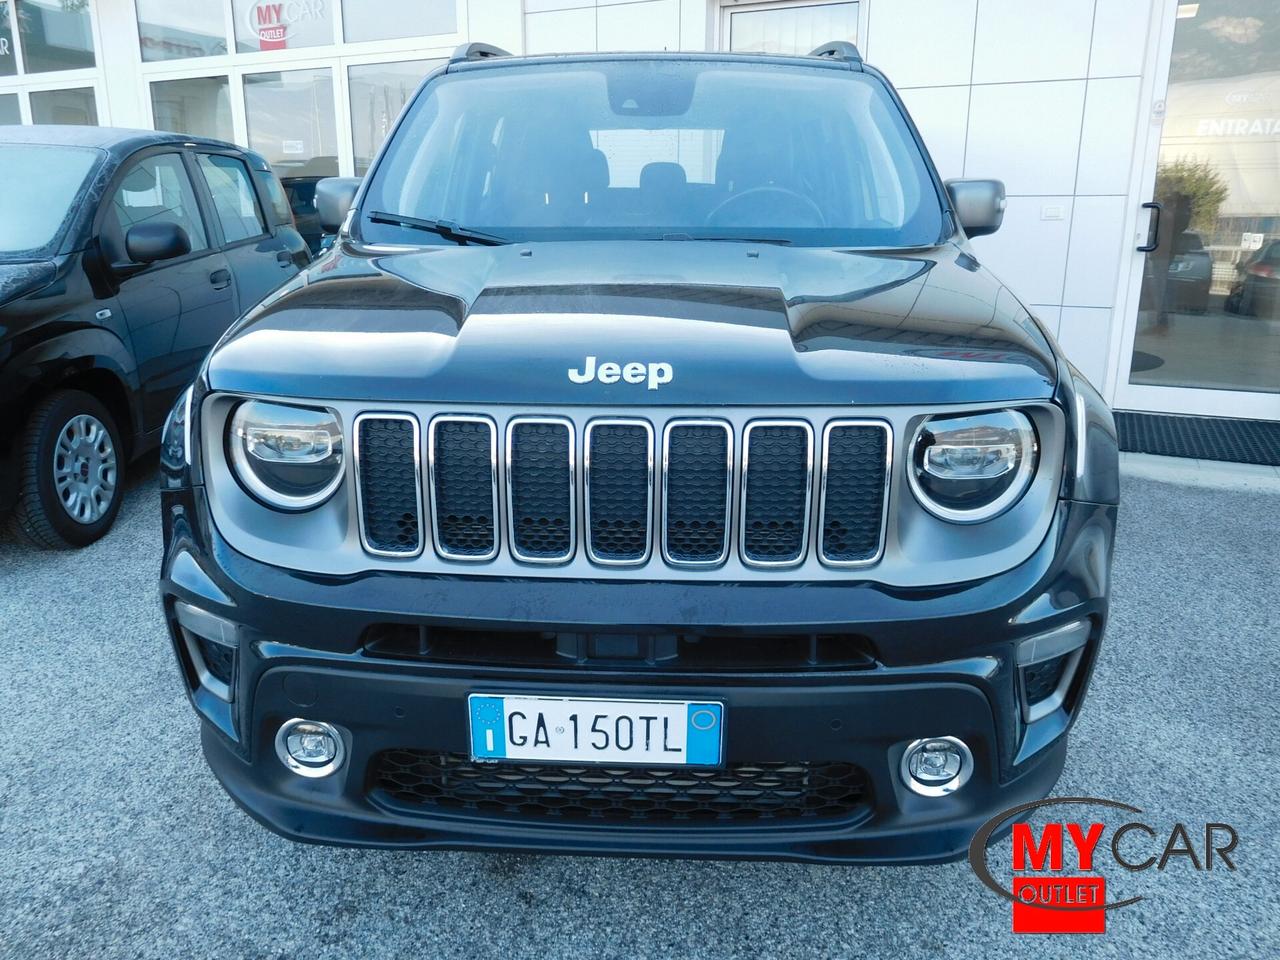 Jeep Renegade 2.0 Mjt 140cv 4WD Active Drive Low Limited